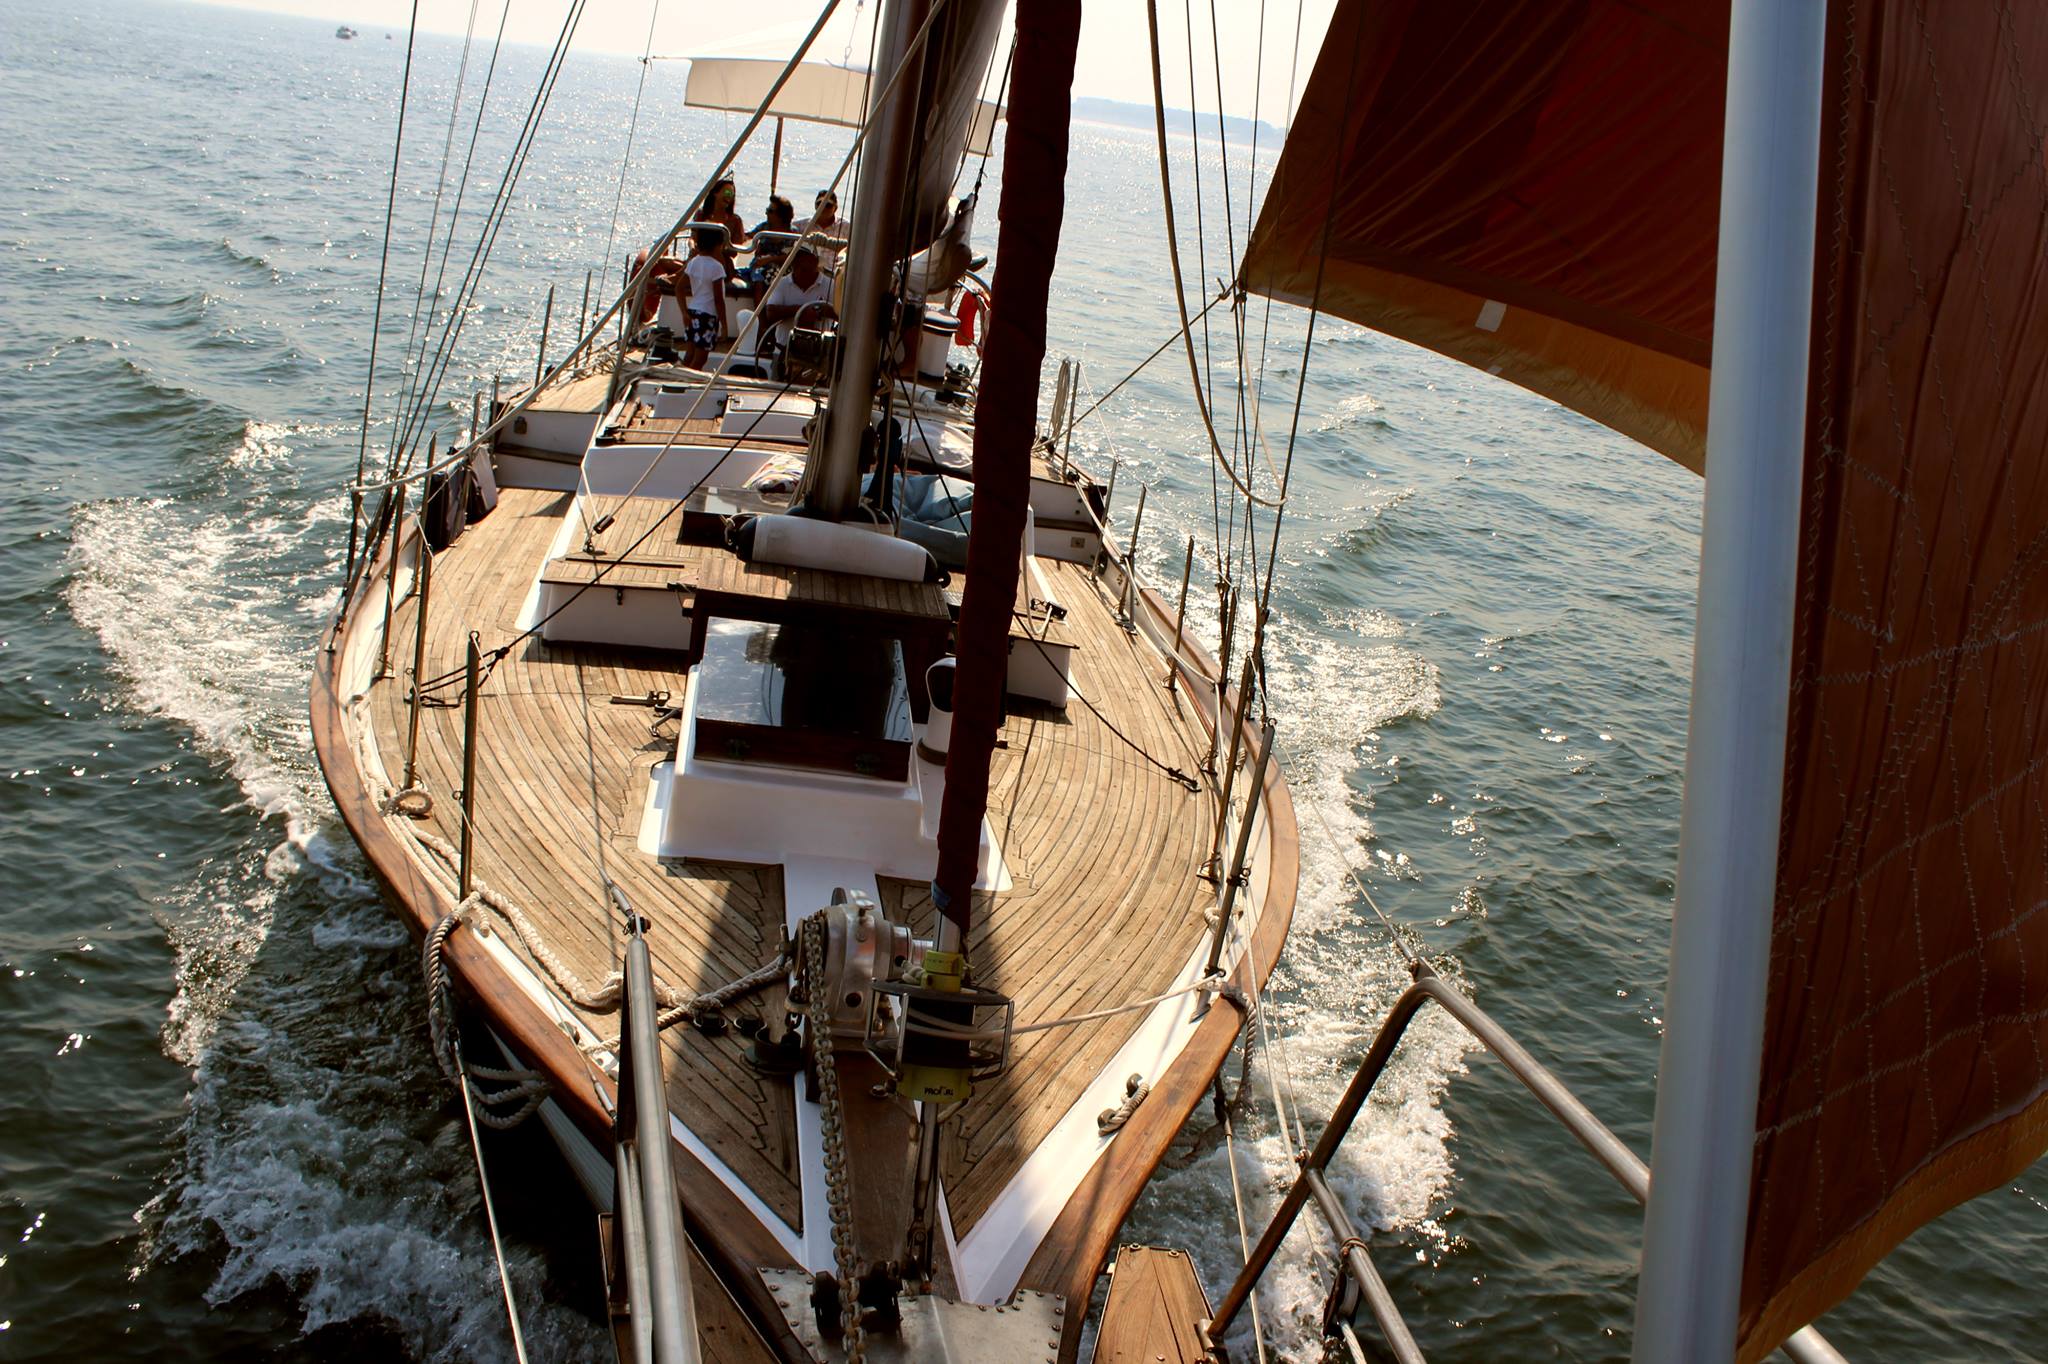 Private tour on a vintage yacht in Lisbon